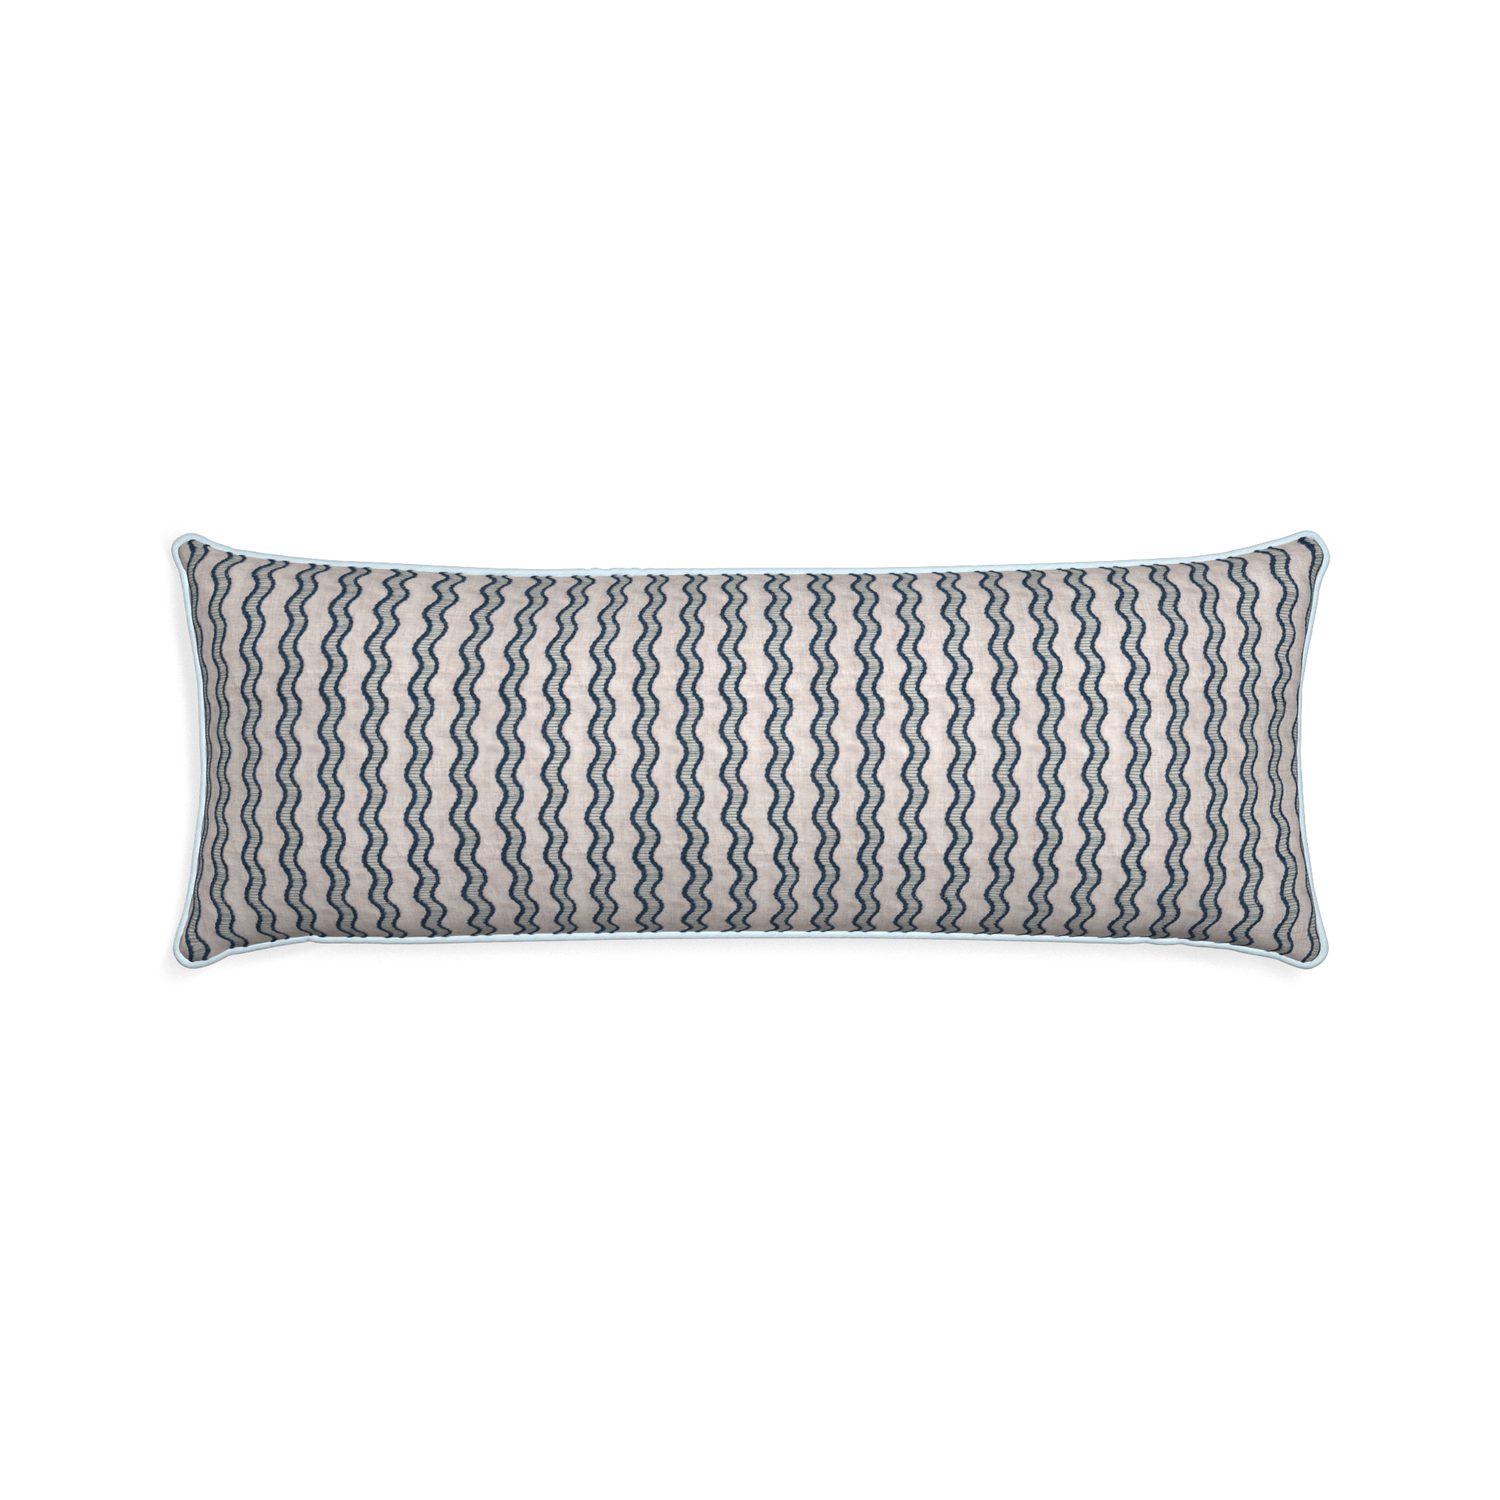 Xl-lumbar beatrice custom embroidered wavepillow with powder piping on white background